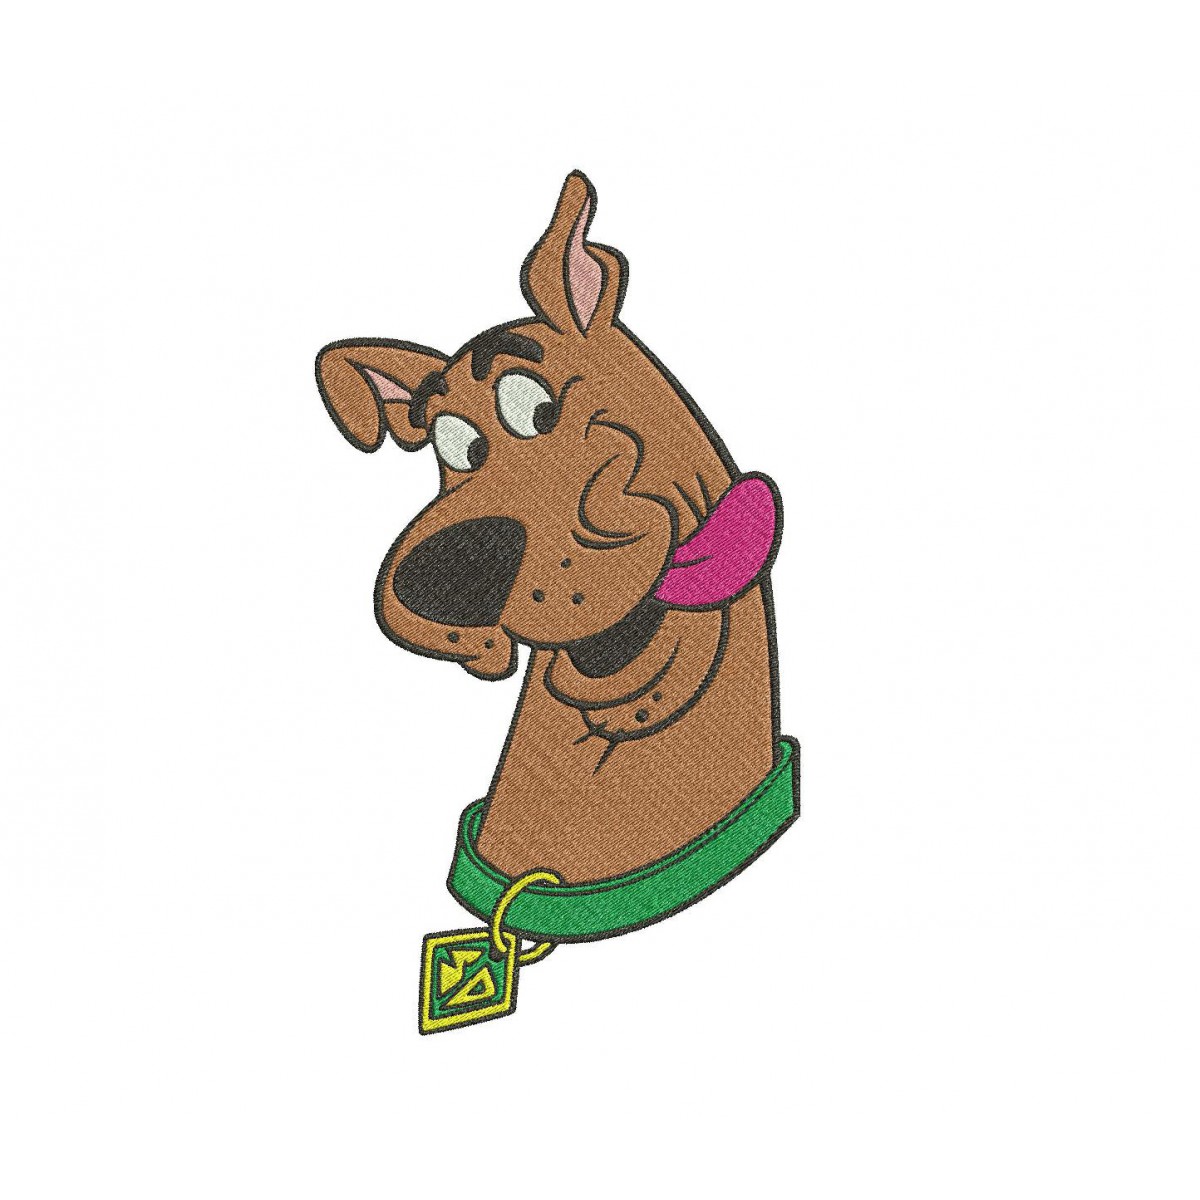 Scooby Doo Dog Embroidered patch 3 1/2 inches Tall 